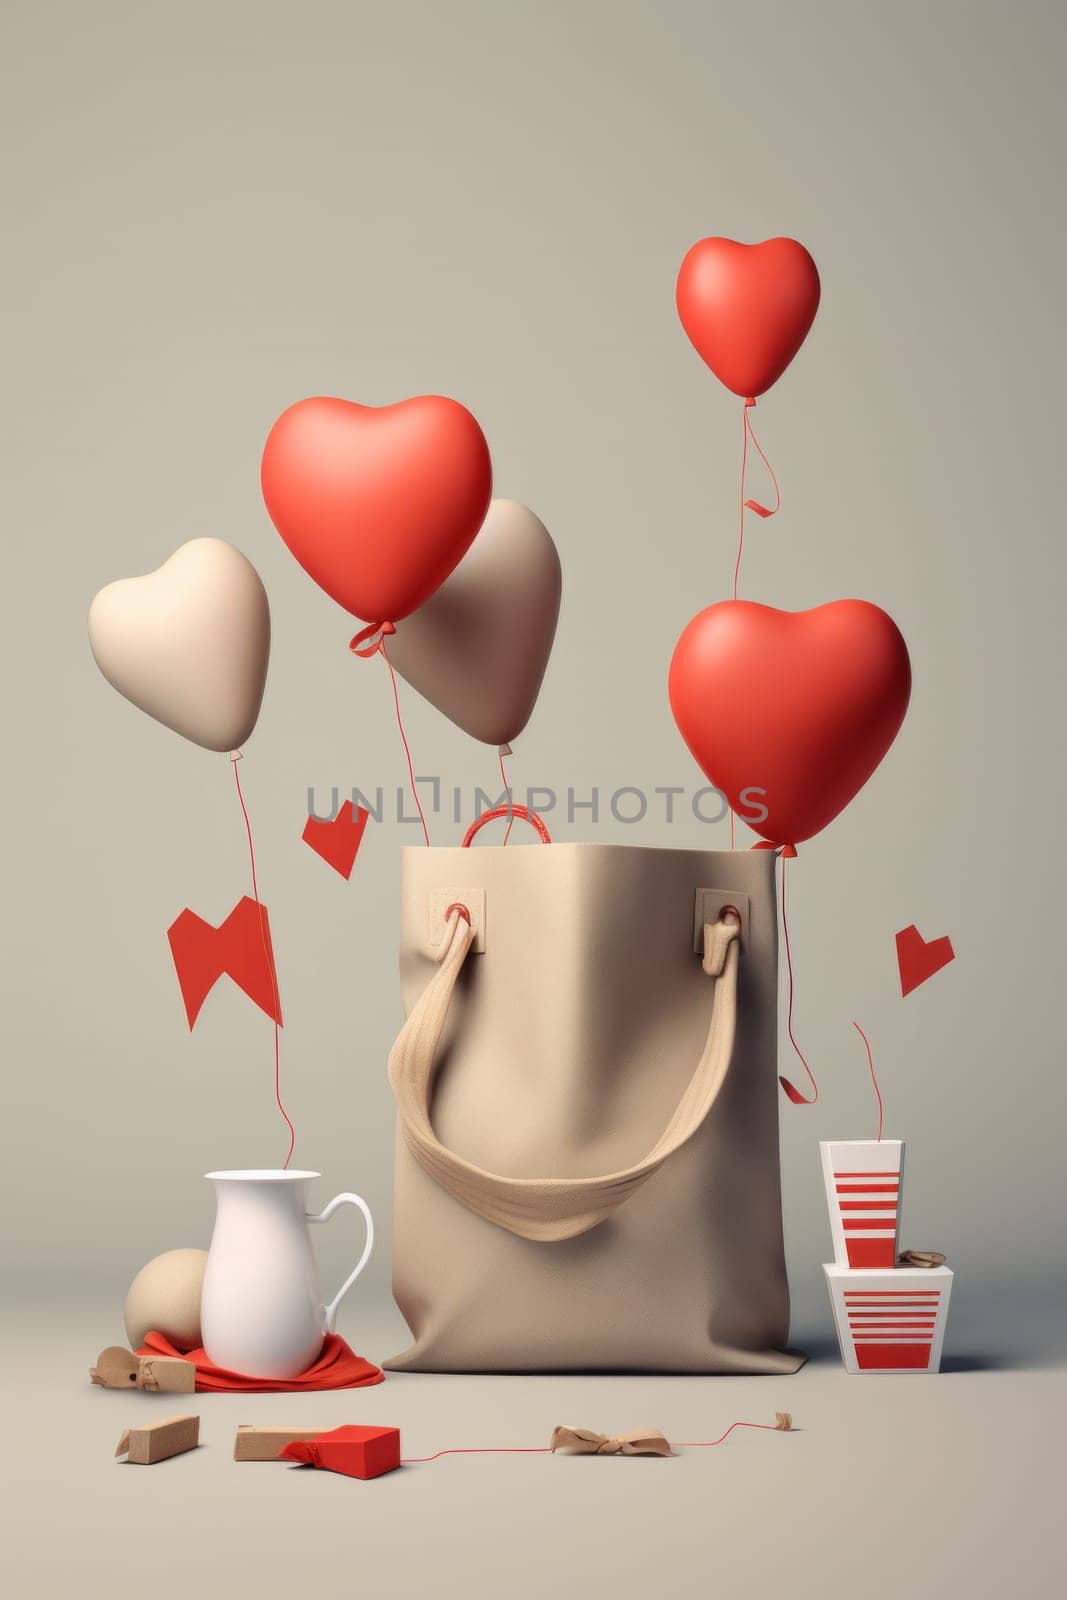 A handbag and a cup of coffee with hearts flying out of it, AI by starush